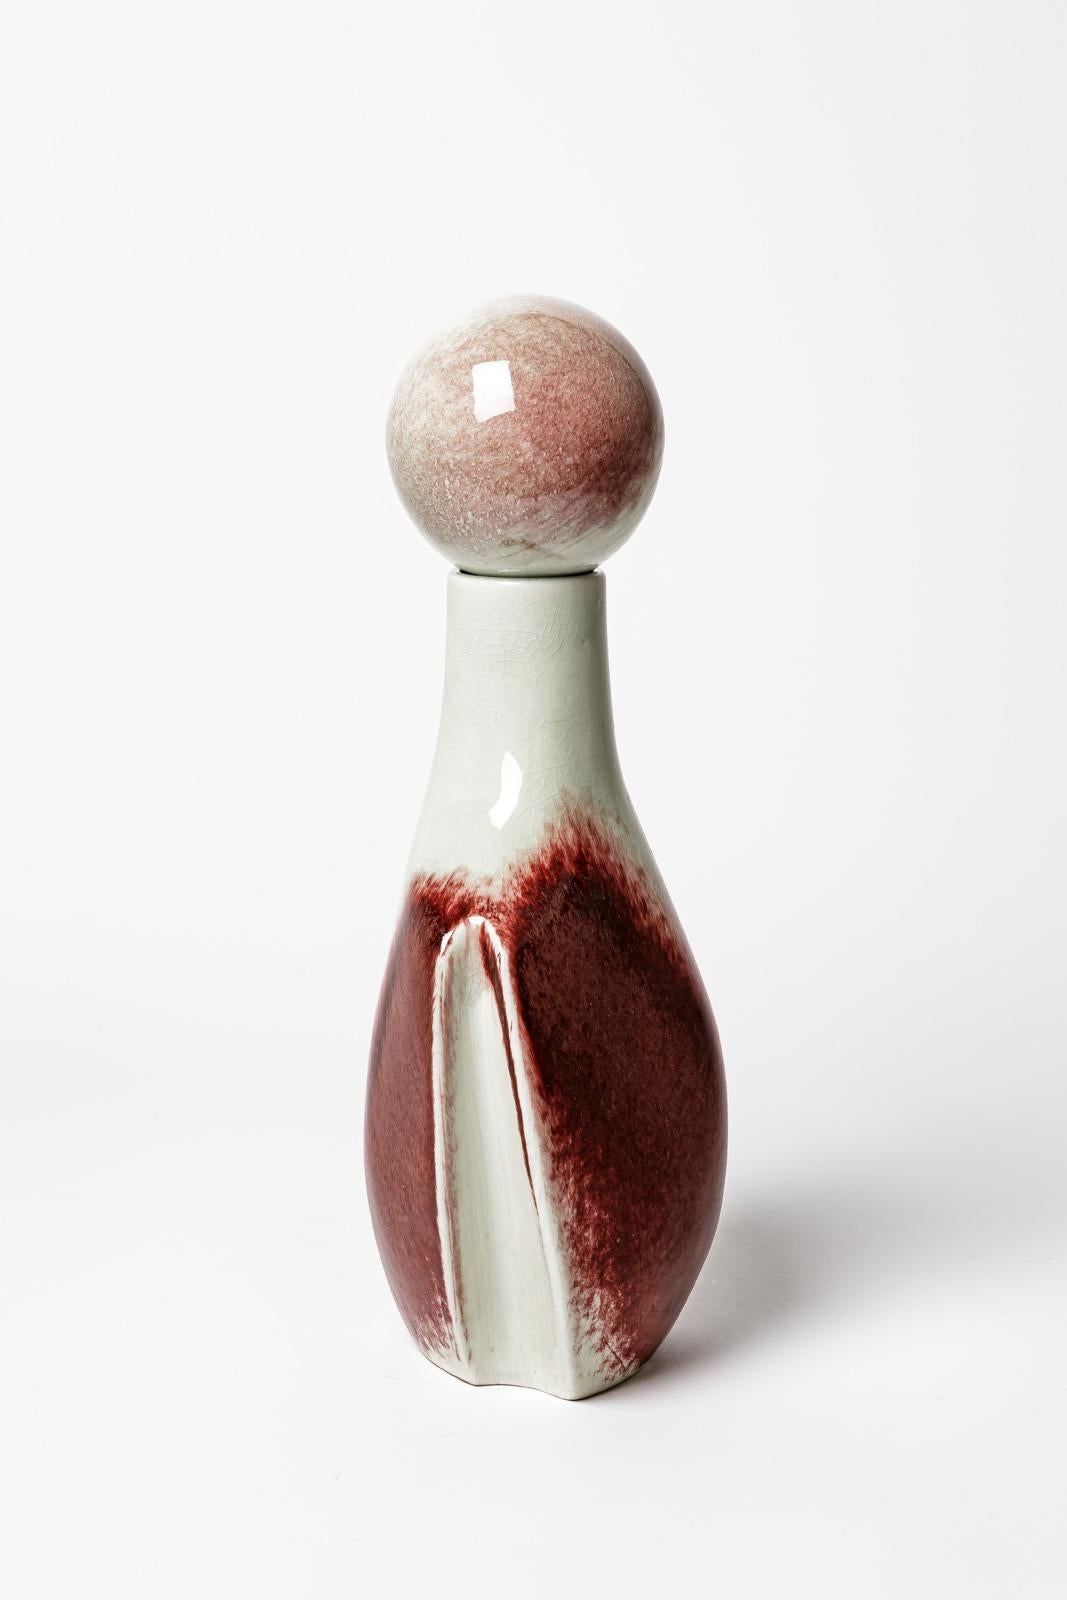 French Red and white porcelain ceramic vase or bottle by Jacqueline and Tim Orr 1970 For Sale